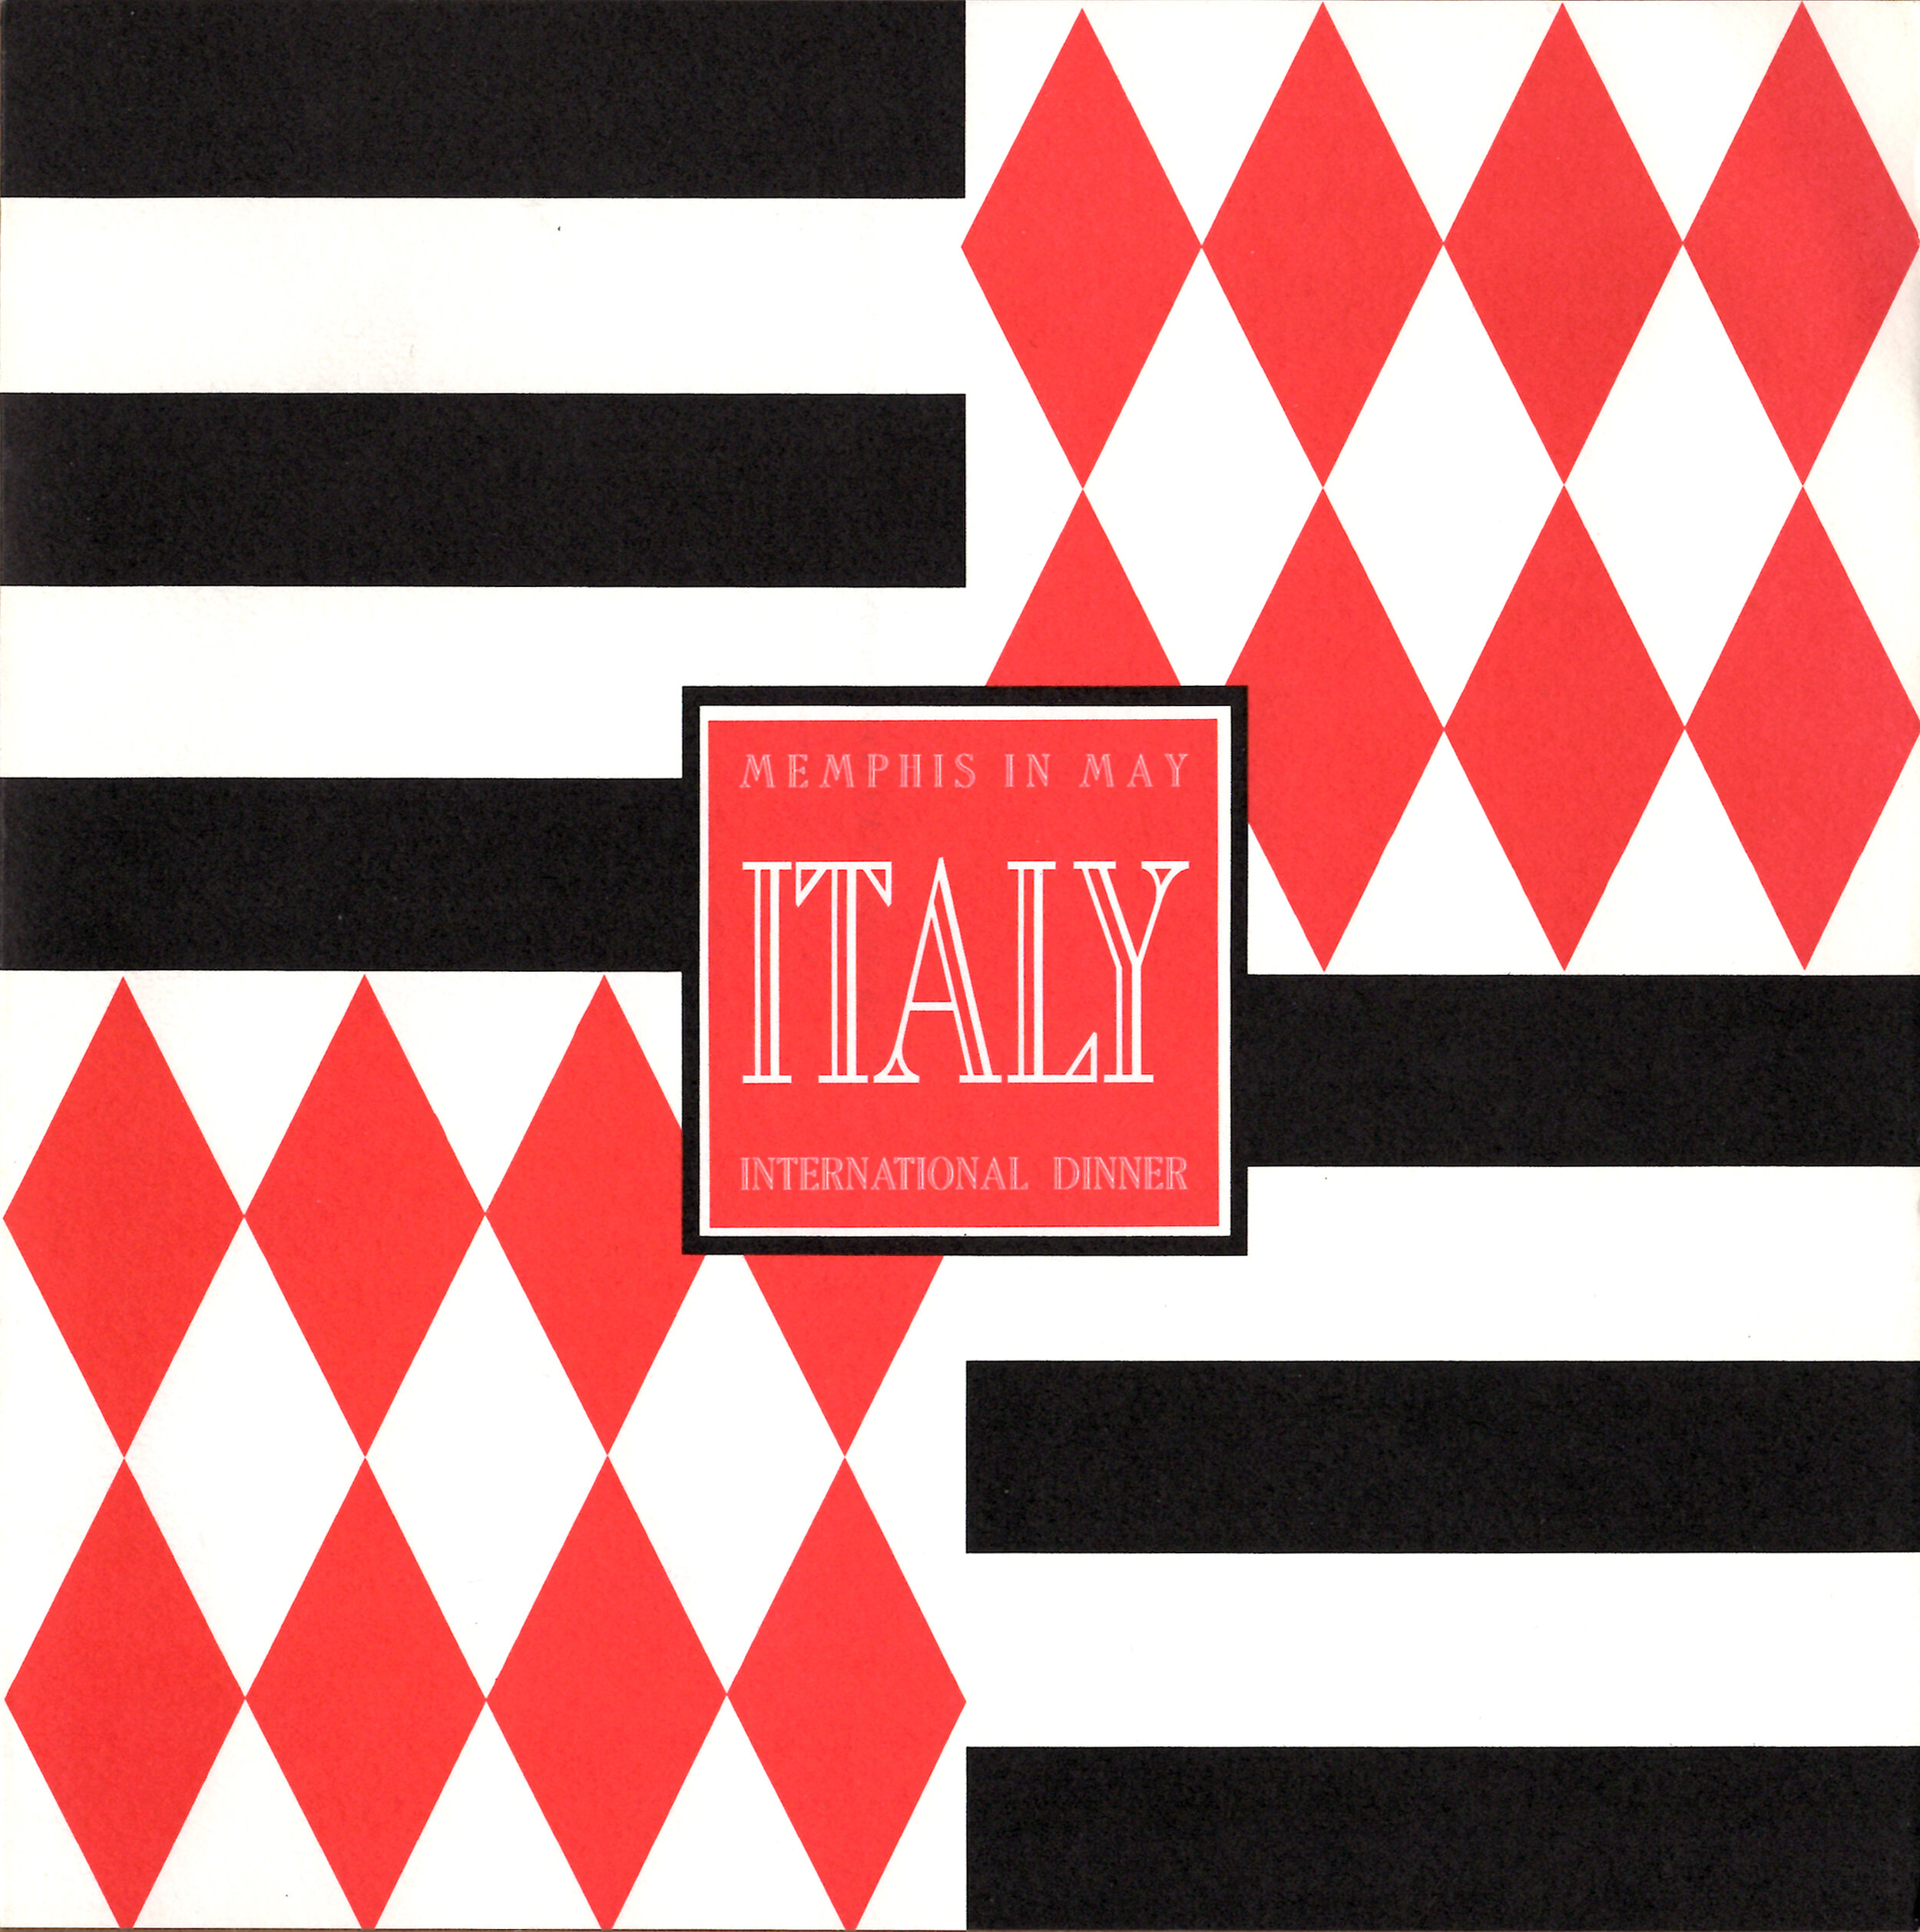  Memphis in May Celebrates Italy  Creative and design  by Chuck Mitchell 